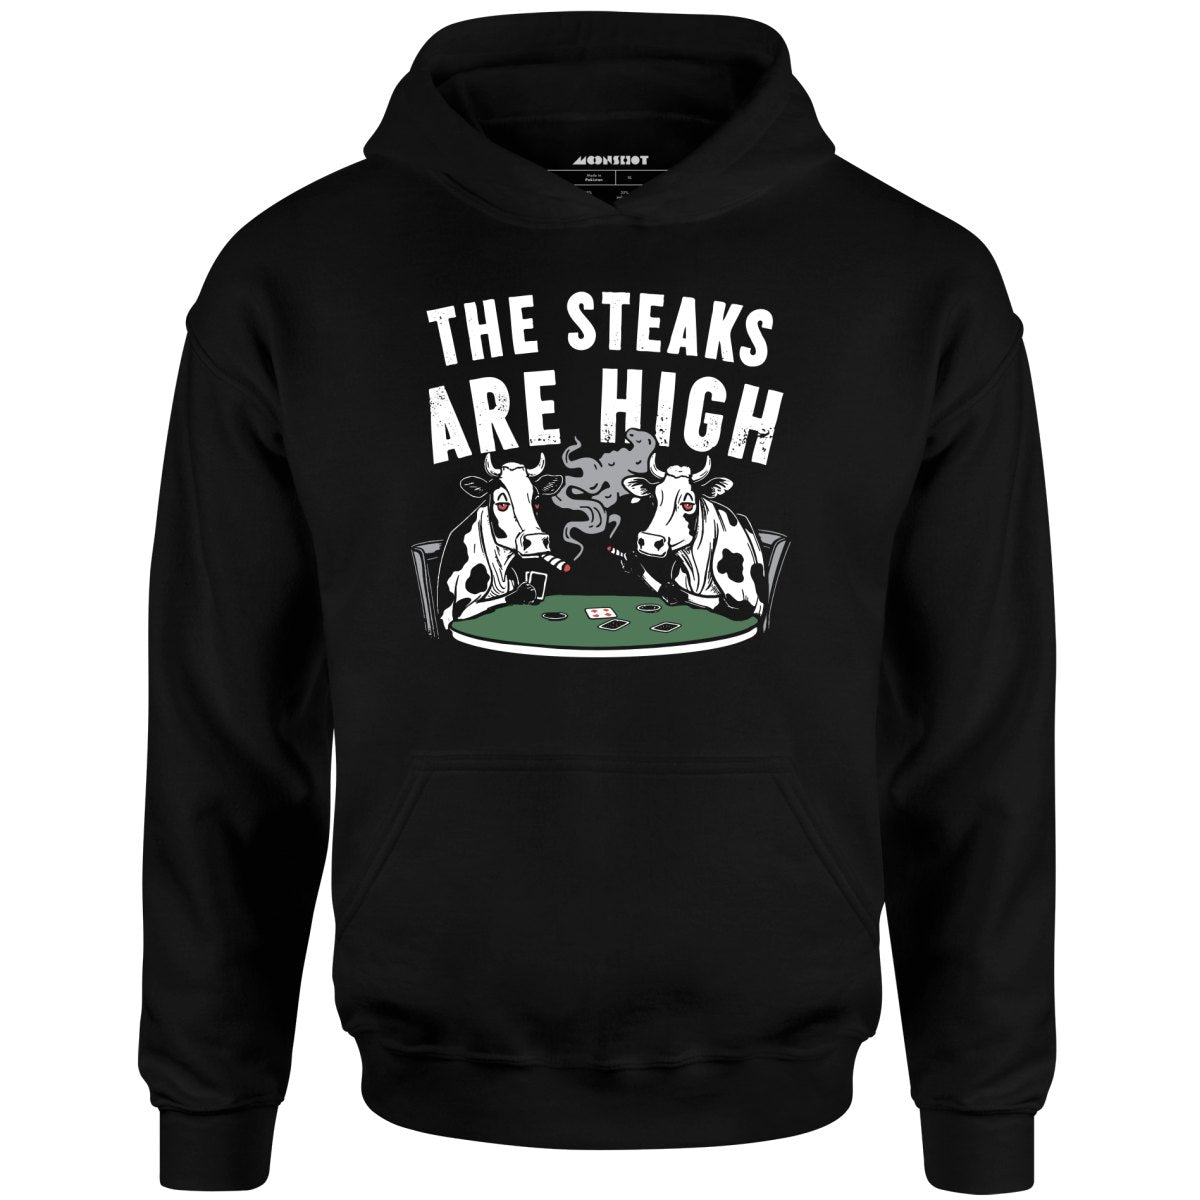 The Steaks Are High - Unisex Hoodie